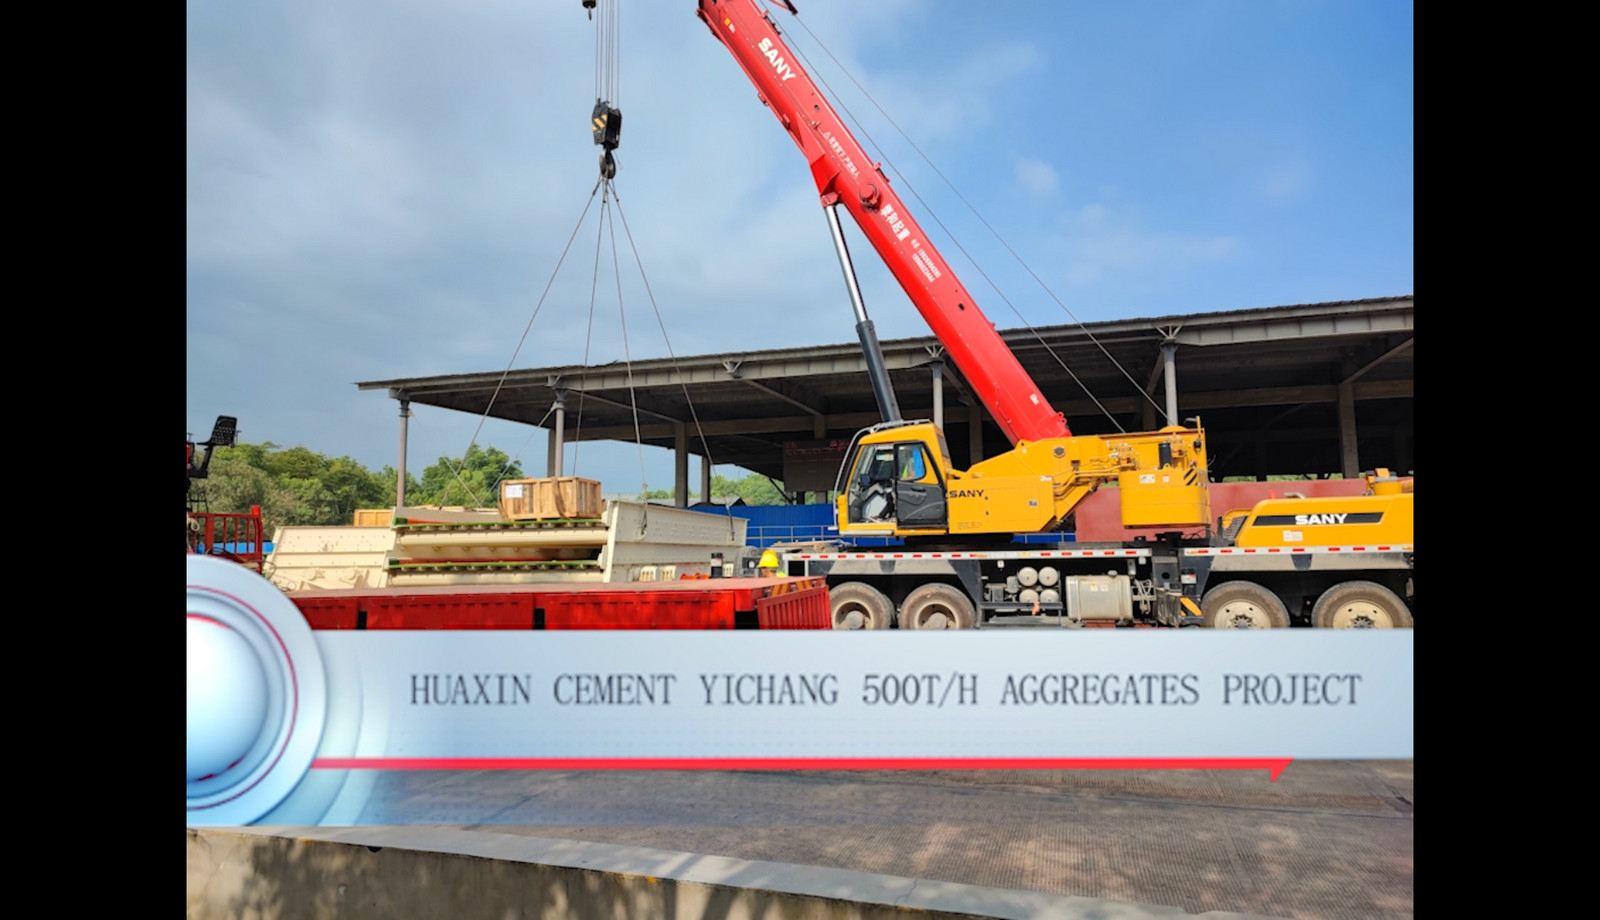 Huaxin Cement Yichang 500t/h Aggregates Project